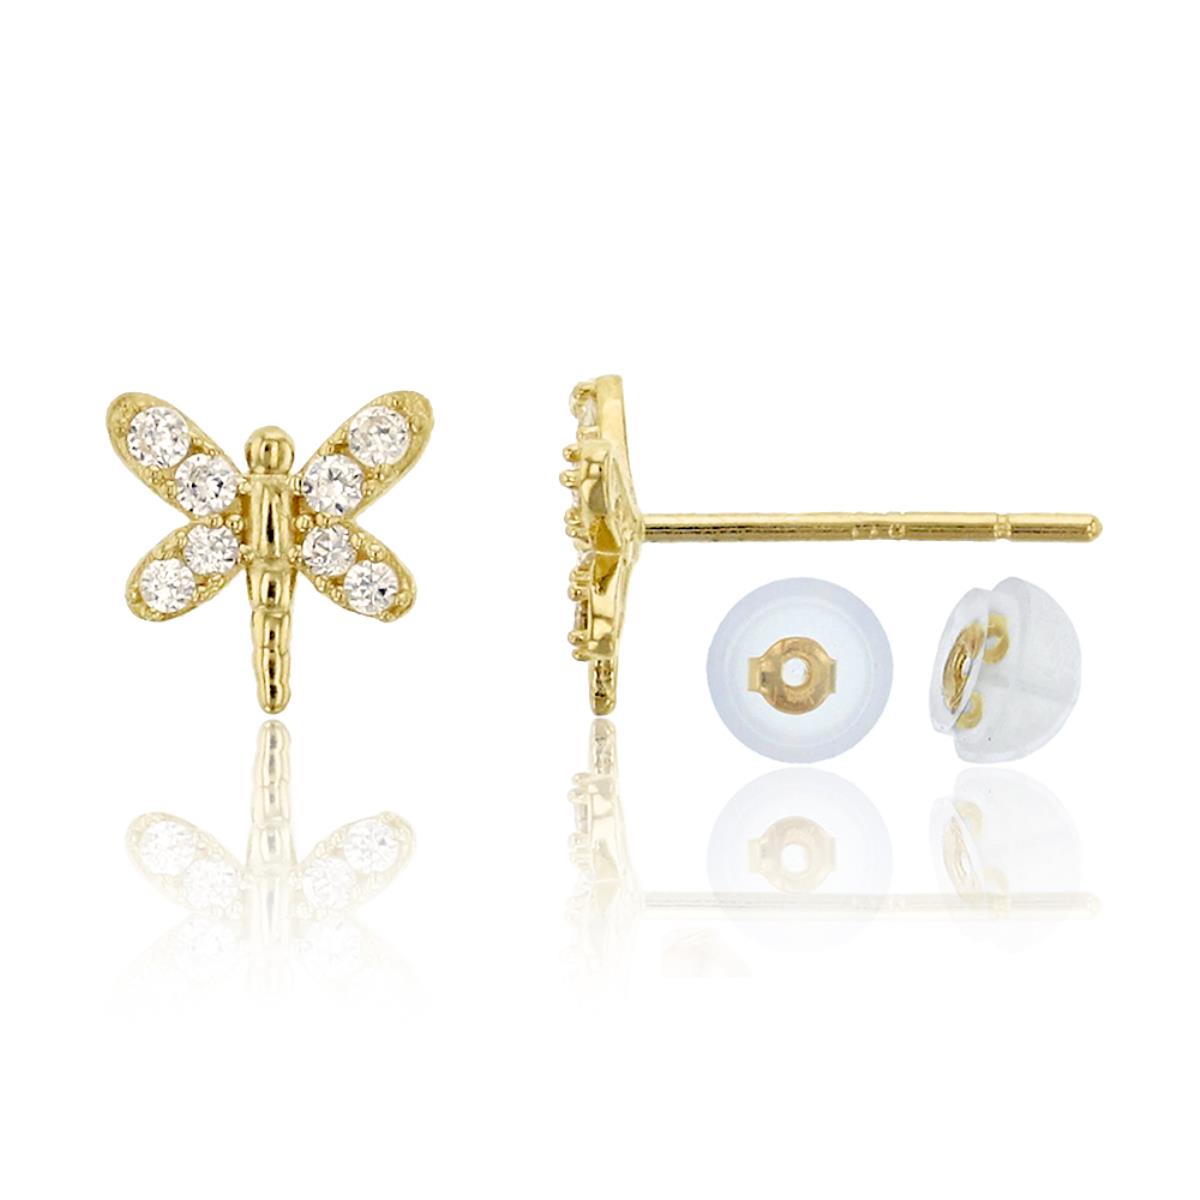 10K Yellow Gold Micropave 6x6mm Dragonfly CZ Stud & 10K Silicone Back